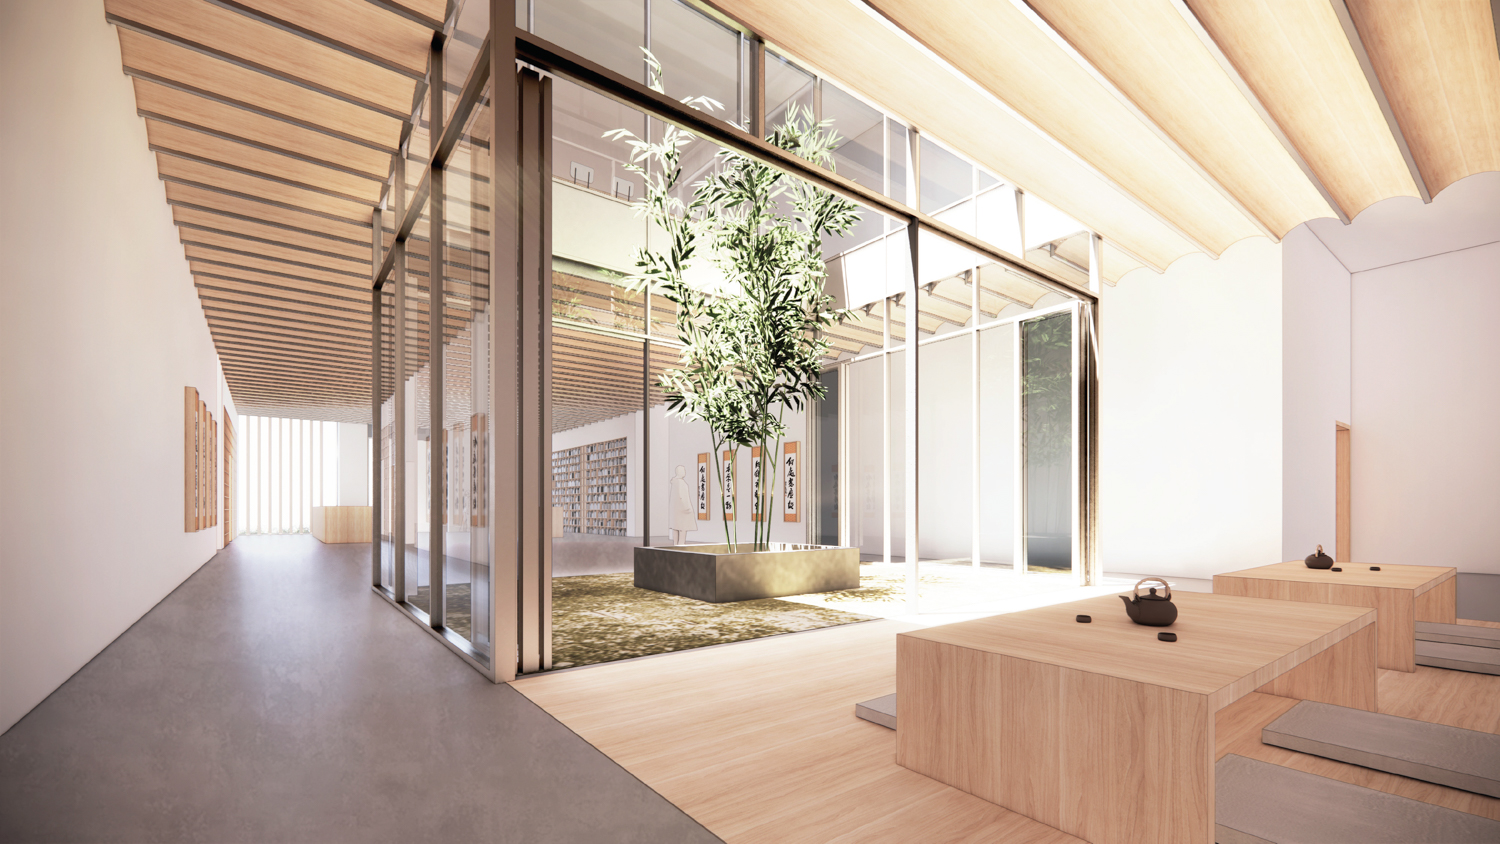 View from the teahouse for the proposed American Buddhist Cultural Society rendering for 1750 Van Ness Avenue, design by Skidmore, Owings & Merrill